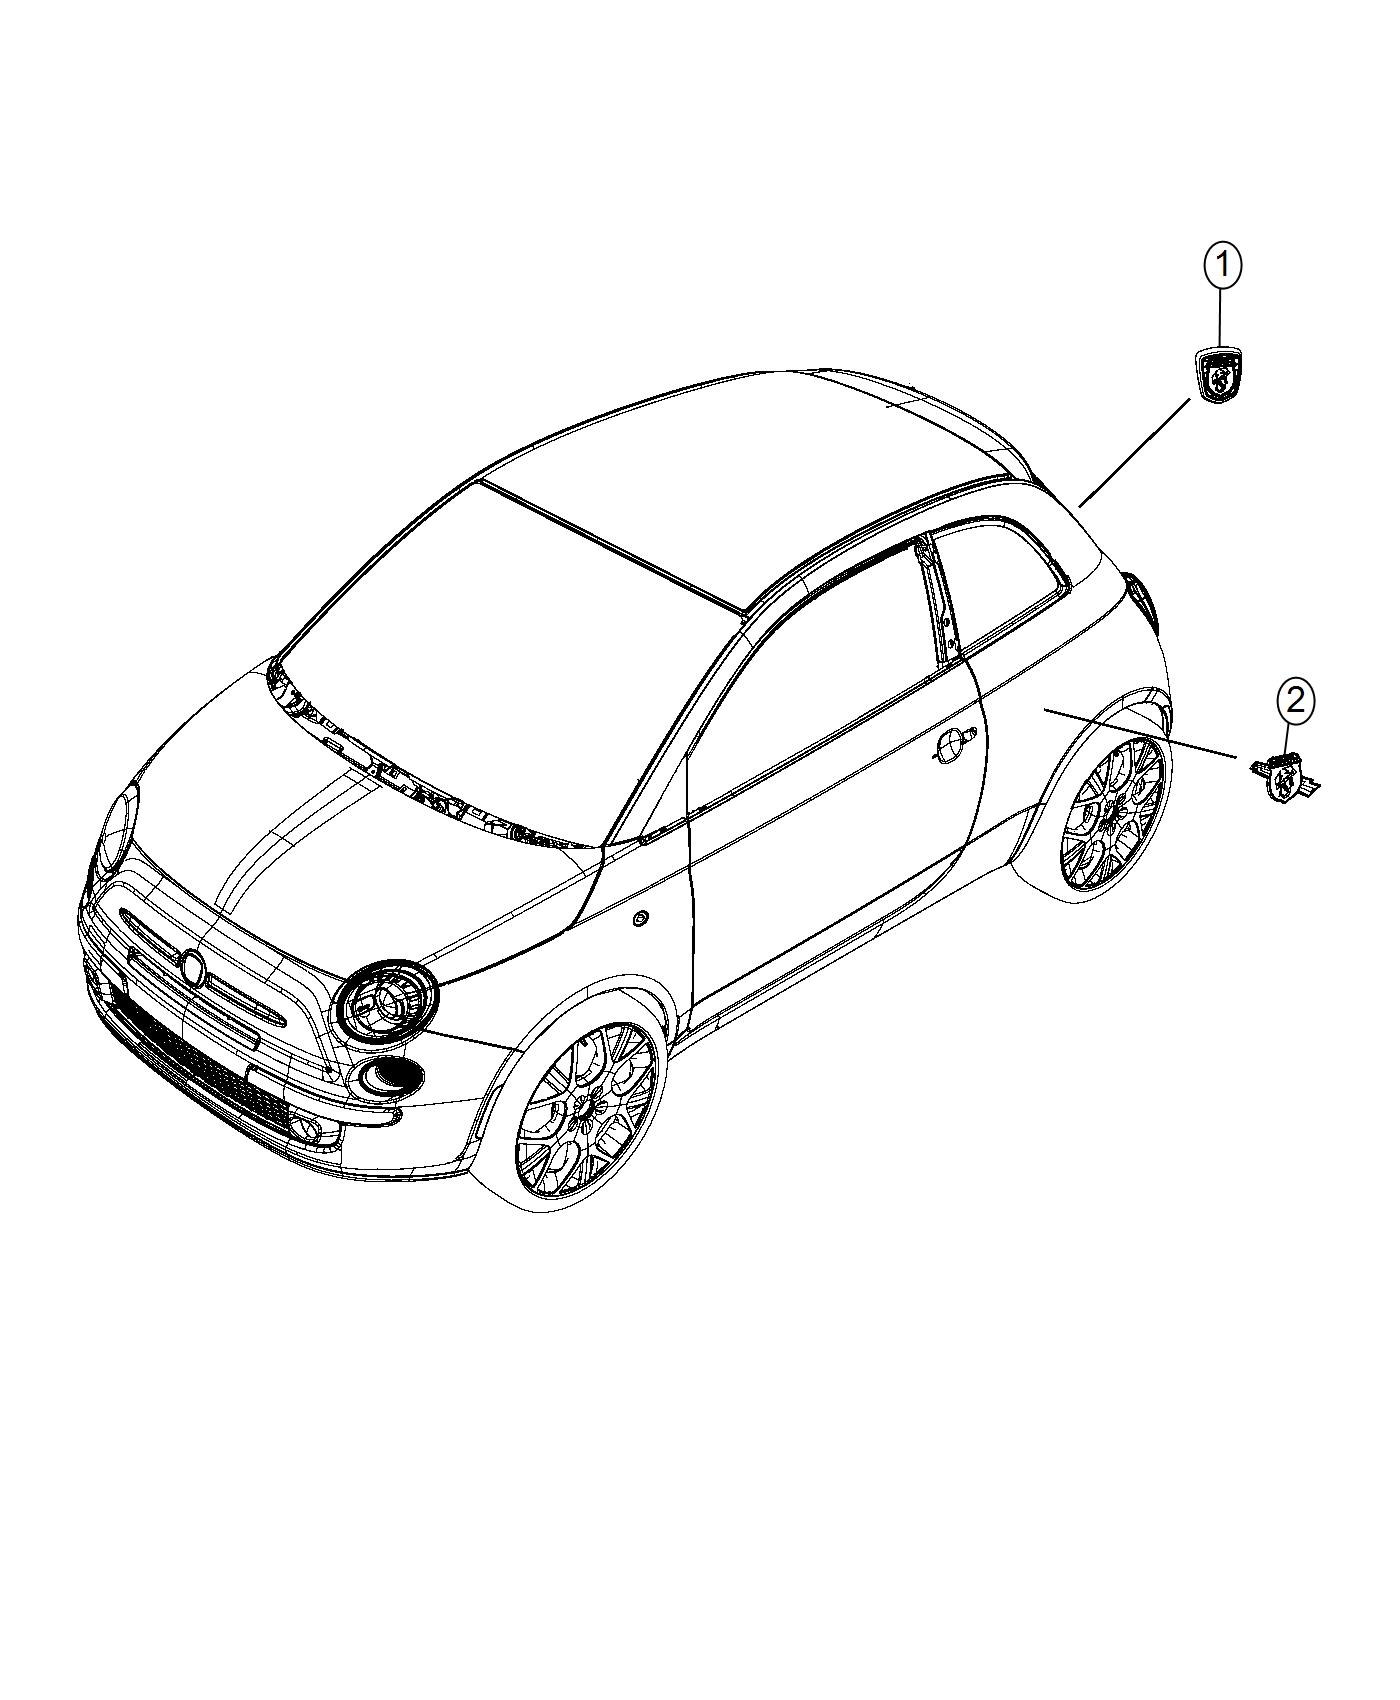 Abarth Package. Diagram